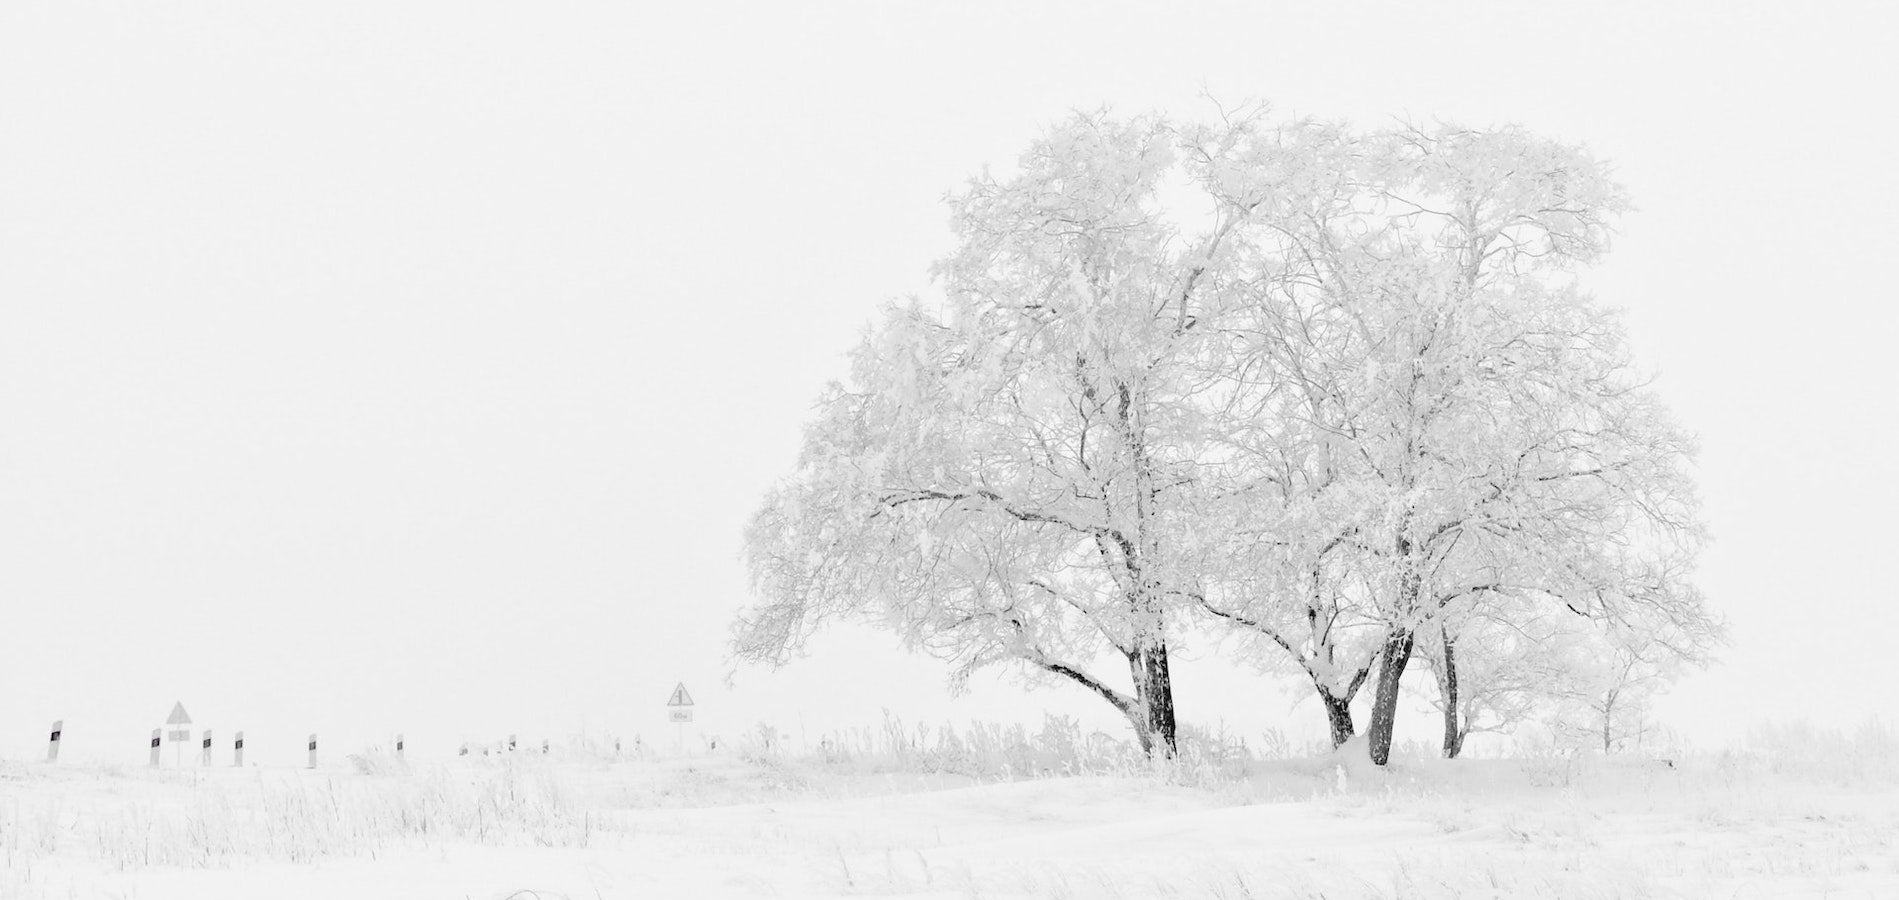 Photo of snowy tree taken using winter photography tips